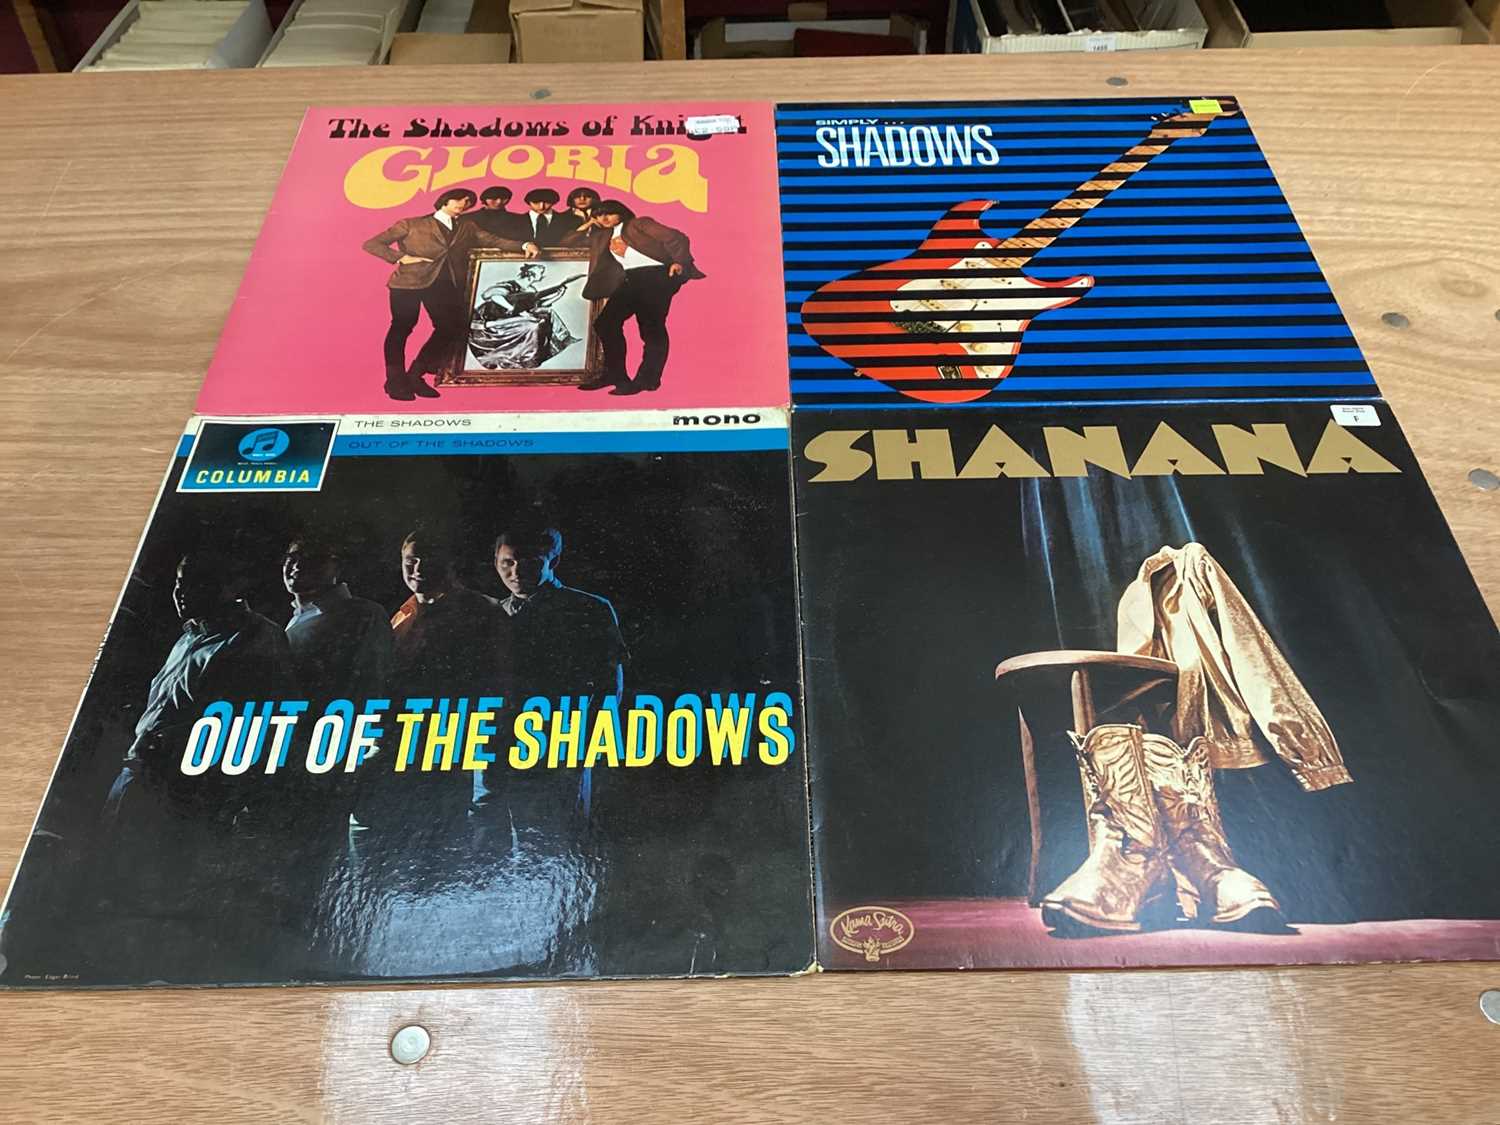 Box of LP records including Smokie, Slade, Shadows, Fergal Sharky and compilations - Image 9 of 38